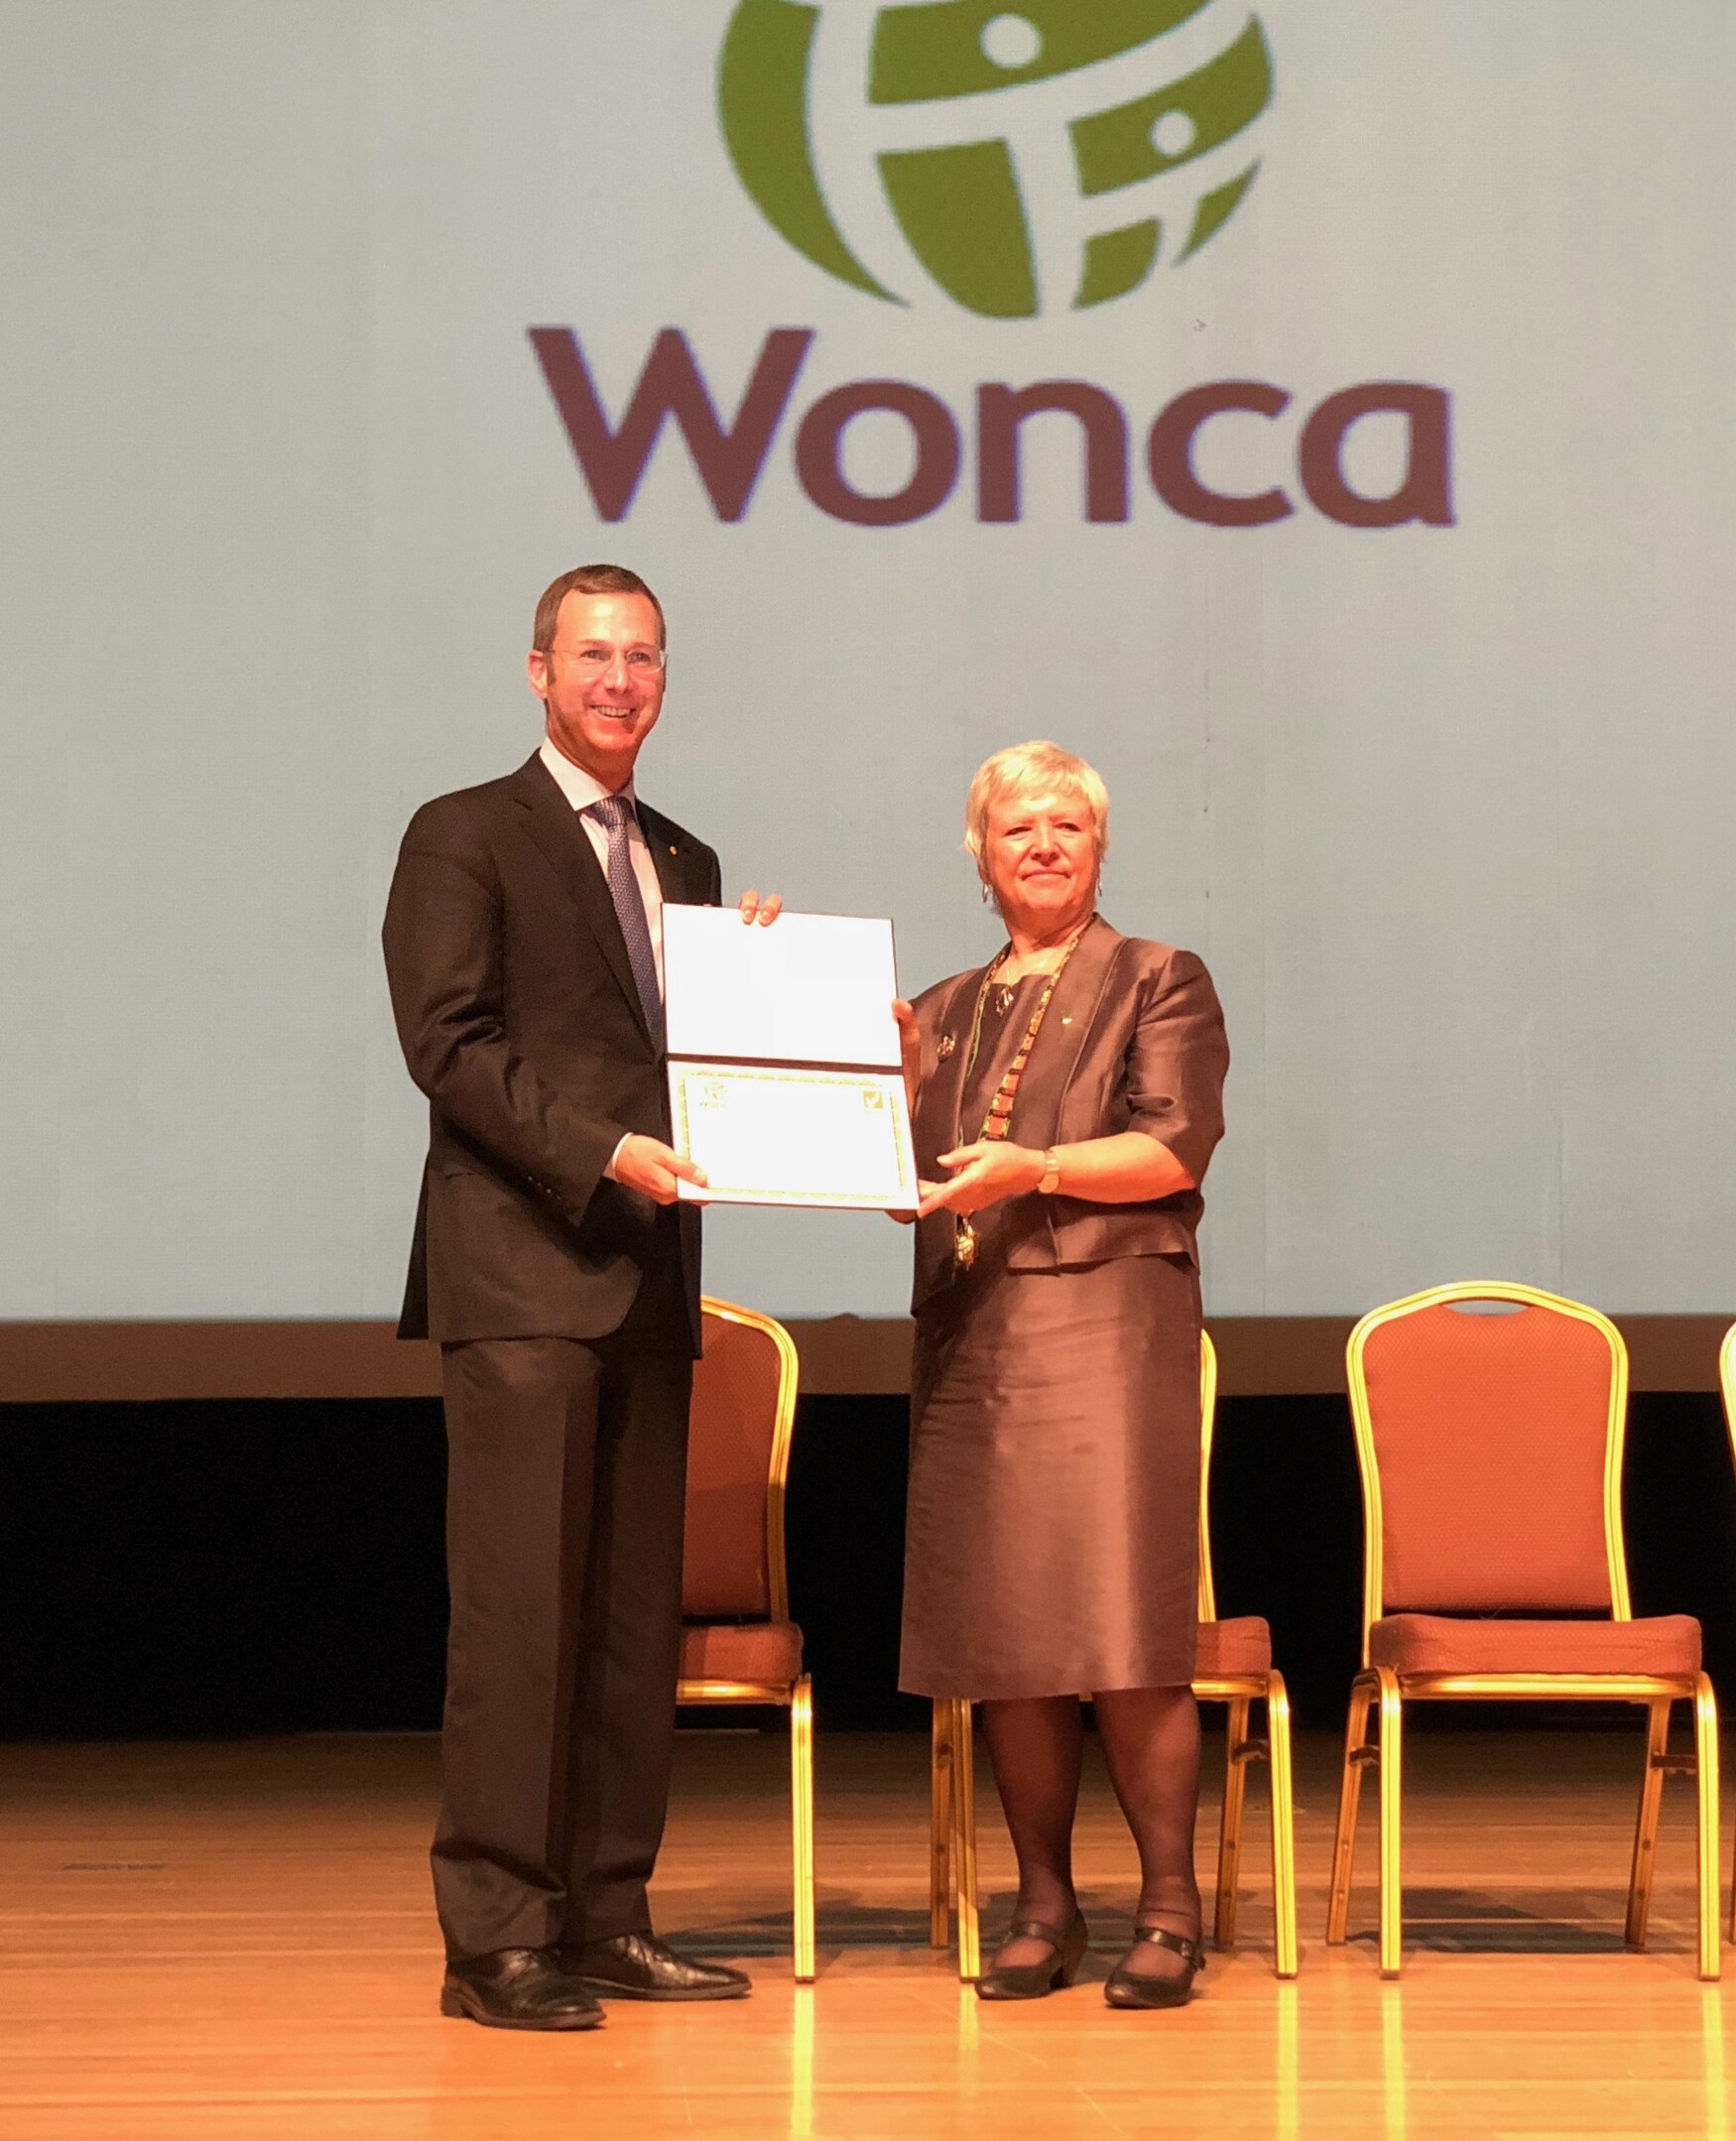 WONCA president Amanda Howe presenting DFCM Chair Dr. Michael Kidd with DFCM's WONCA accreditation certificate to DFCM